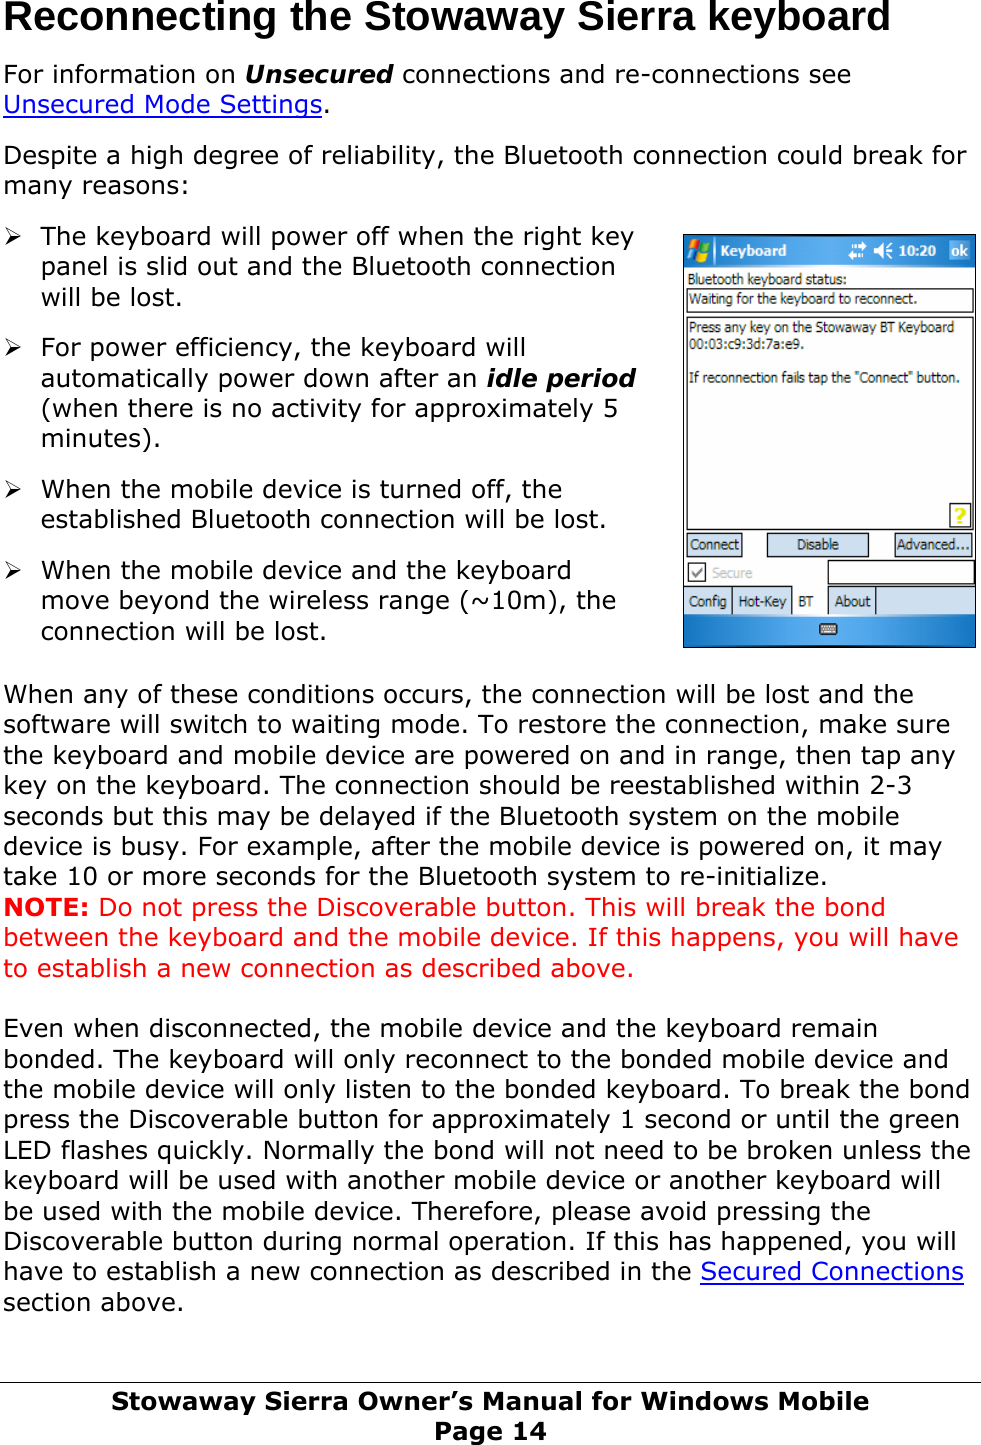 Reconnecting the Stowaway Sierra keyboard   For information on Unsecured connections and re-connections see Unsecured Mode Settings.  Despite a high degree of reliability, the Bluetooth connection could break for many reasons:  ows Mobile Page 14 ¾ The keyboard will power off when the right key panel is slid out and the Bluetooth connection will be lost.  ¾ For power efficiency, the keyboard will automatically power down after an idle period (when there is no activity for approximately 5 minutes).  ¾ When the mobile device is turned off, the established Bluetooth connection will be lost.  ¾ When the mobile device and the keyboard move beyond the wireless range (~10m), the connection will be lost.  When any of these conditions occurs, the connection will be lost and the software will switch to waiting mode. To restore the connection, make sure the keyboard and mobile device are powered on and in range, then tap any key on the keyboard. The connection should be reestablished within 2-3 seconds but this may be delayed if the Bluetooth system on the mobile device is busy. For example, after the mobile device is powered on, it may take 10 or more seconds for the Bluetooth system to re-initialize.  NOTE: Do not press the Discoverable button. This will break the bond between the keyboard and the mobile device. If this happens, you will have to establish a new connection as described above.   Even when disconnected, the mobile device and the keyboard remain bonded. The keyboard will only reconnect to the bonded mobile device and the mobile device will only listen to the bonded keyboard. To break the bond press the Discoverable button for approximately 1 second or until the green LED flashes quickly. Normally the bond will not need to be broken unless the keyboard will be used with another mobile device or another keyboard will be used with the mobile device. Therefore, please avoid pressing the Discoverable button during normal operation. If this has happened, you will have to establish a new connection as described in the Secured Connections section above.  Stowaway Sierra Owner’s Manual for Wind